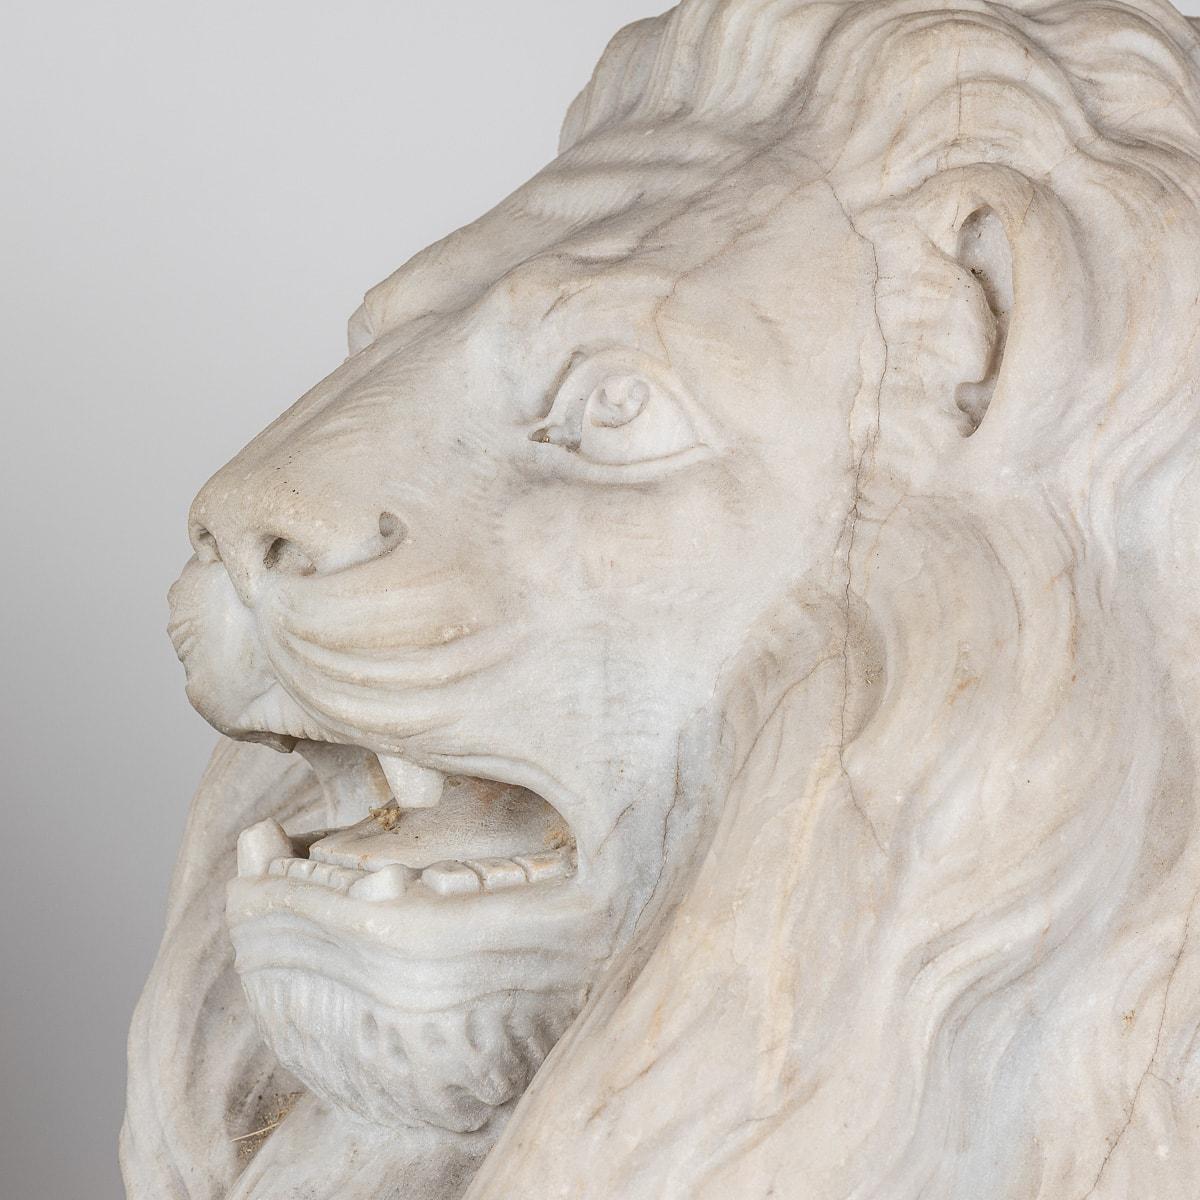 Antique 19th Century exquisite pair of Italian marble lions, each bearing a heraldic shield. Carved meticulously from Carrara marble, renowned for its purity and elegance, these majestic sculptures epitomise the opulence of the XIX century